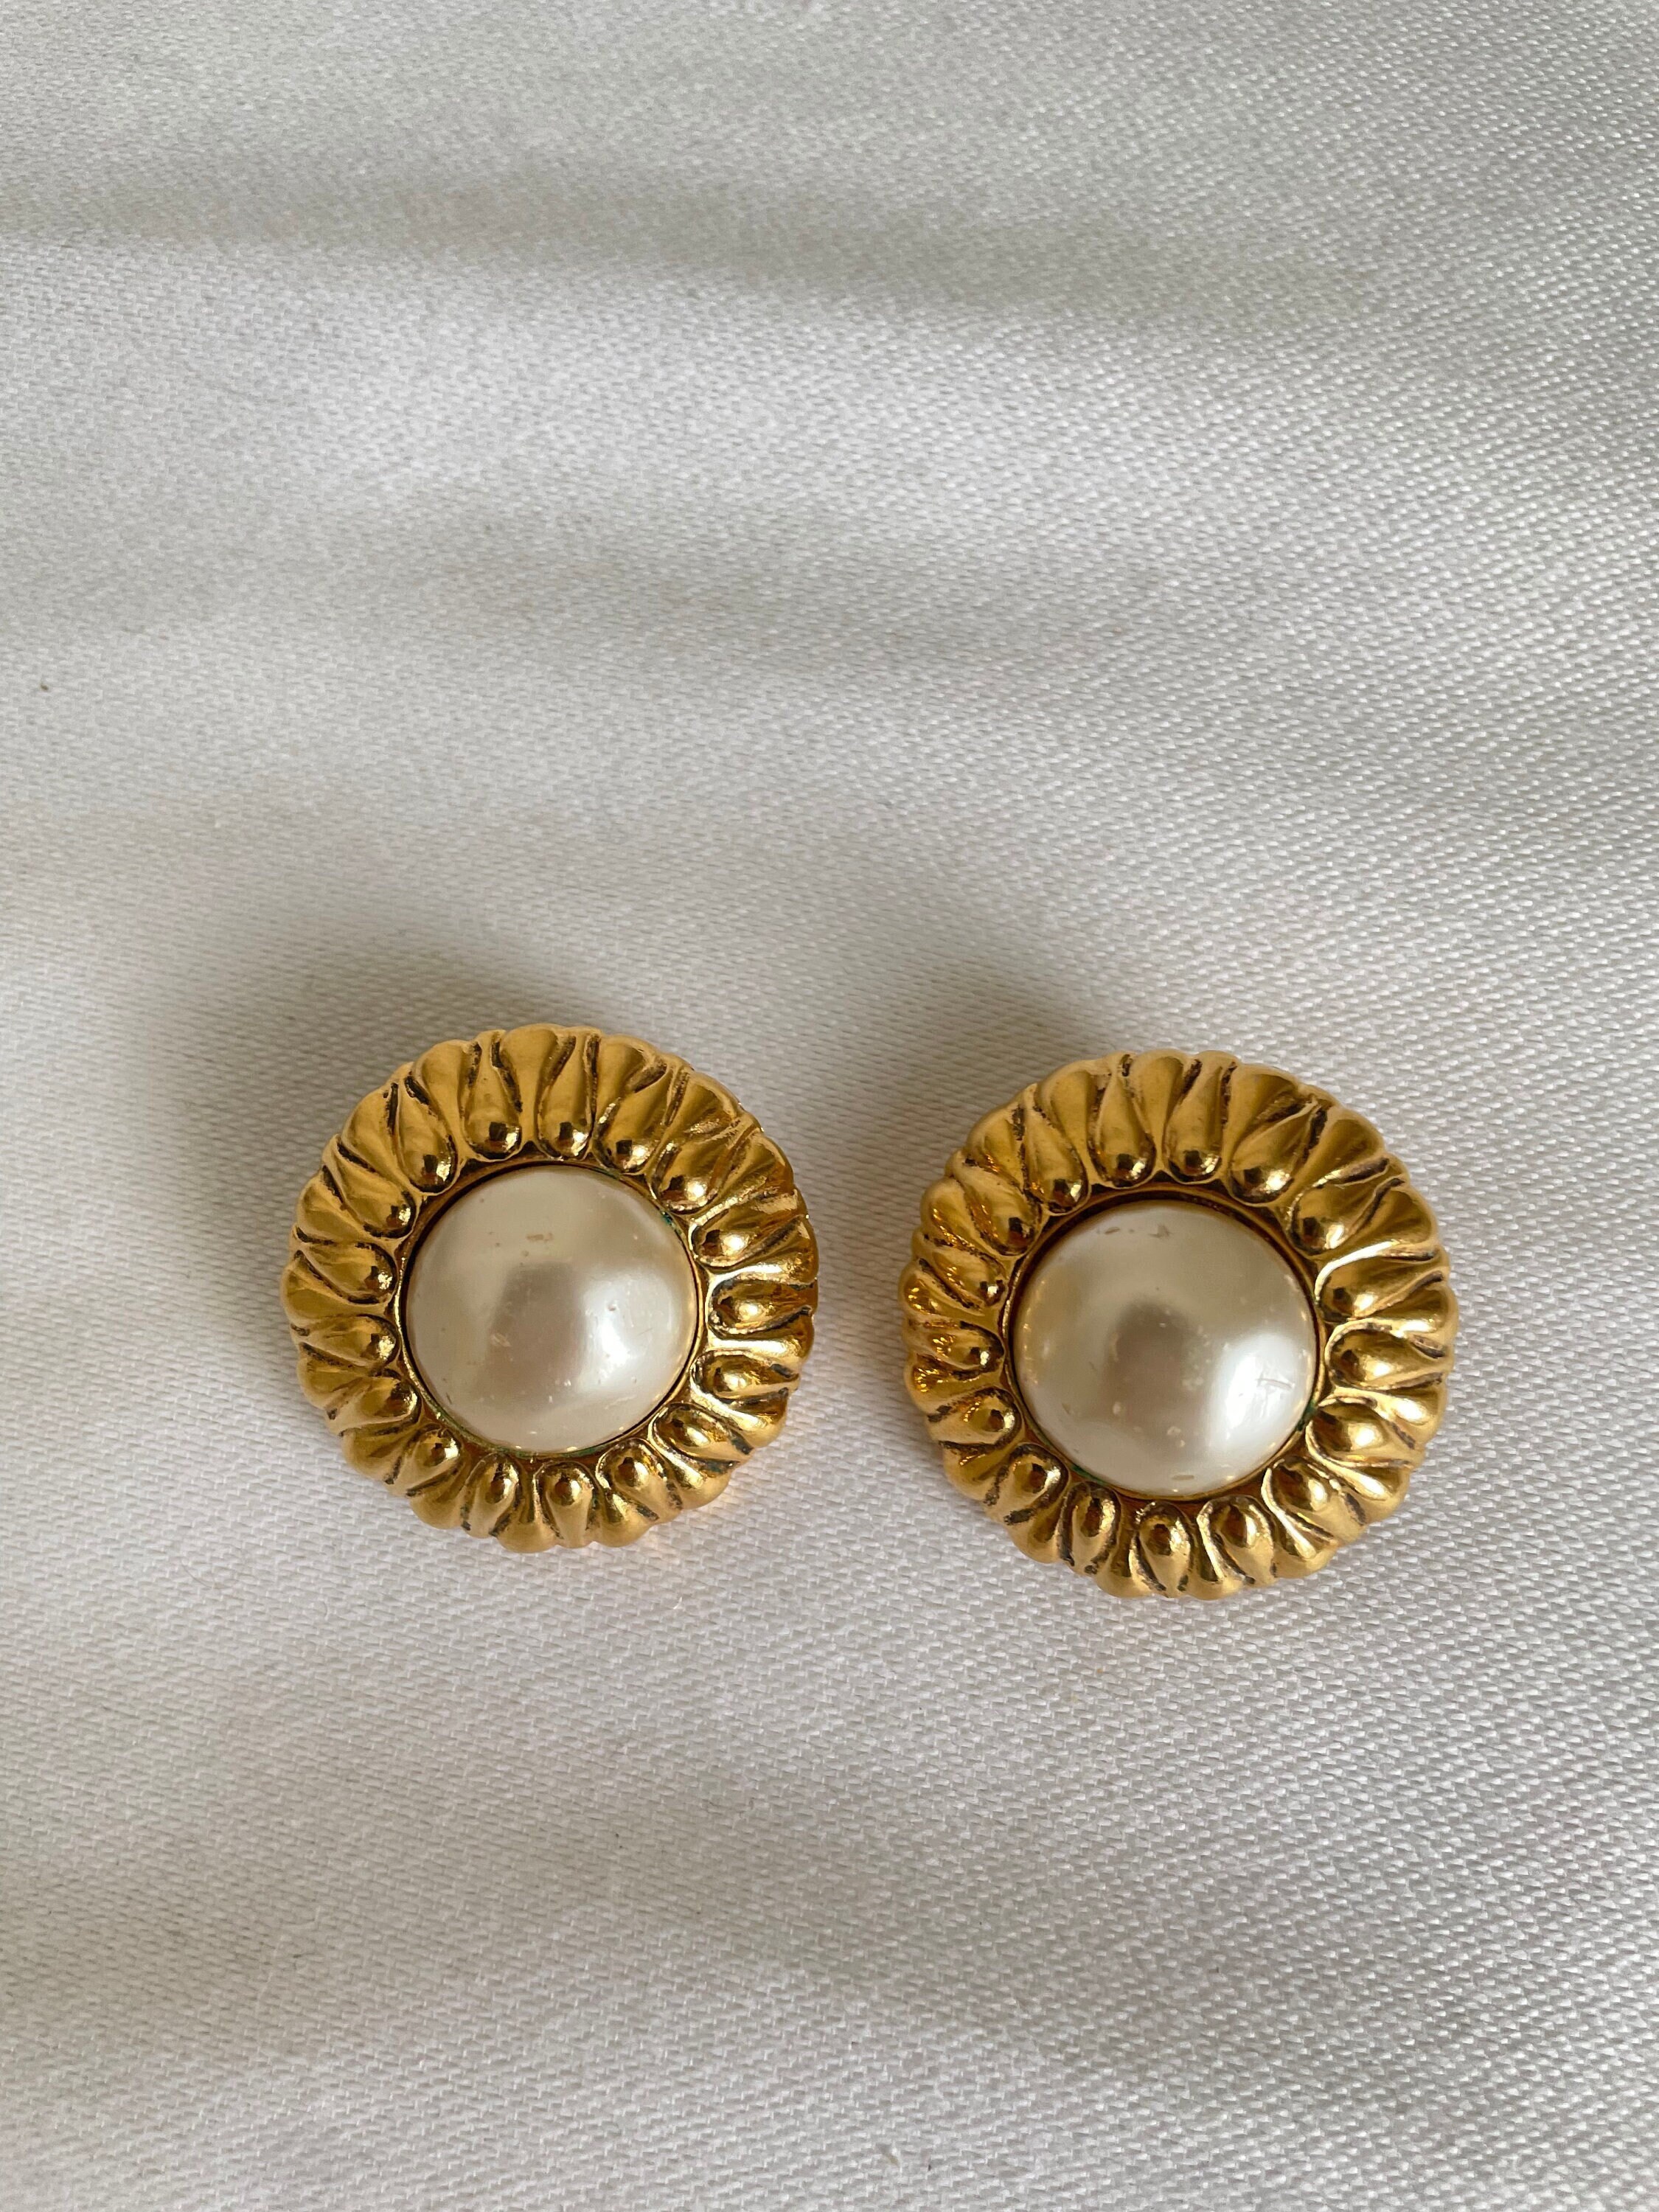 1984 Chanel Collection 23 Pearl and Rhinestone Drop Earrings